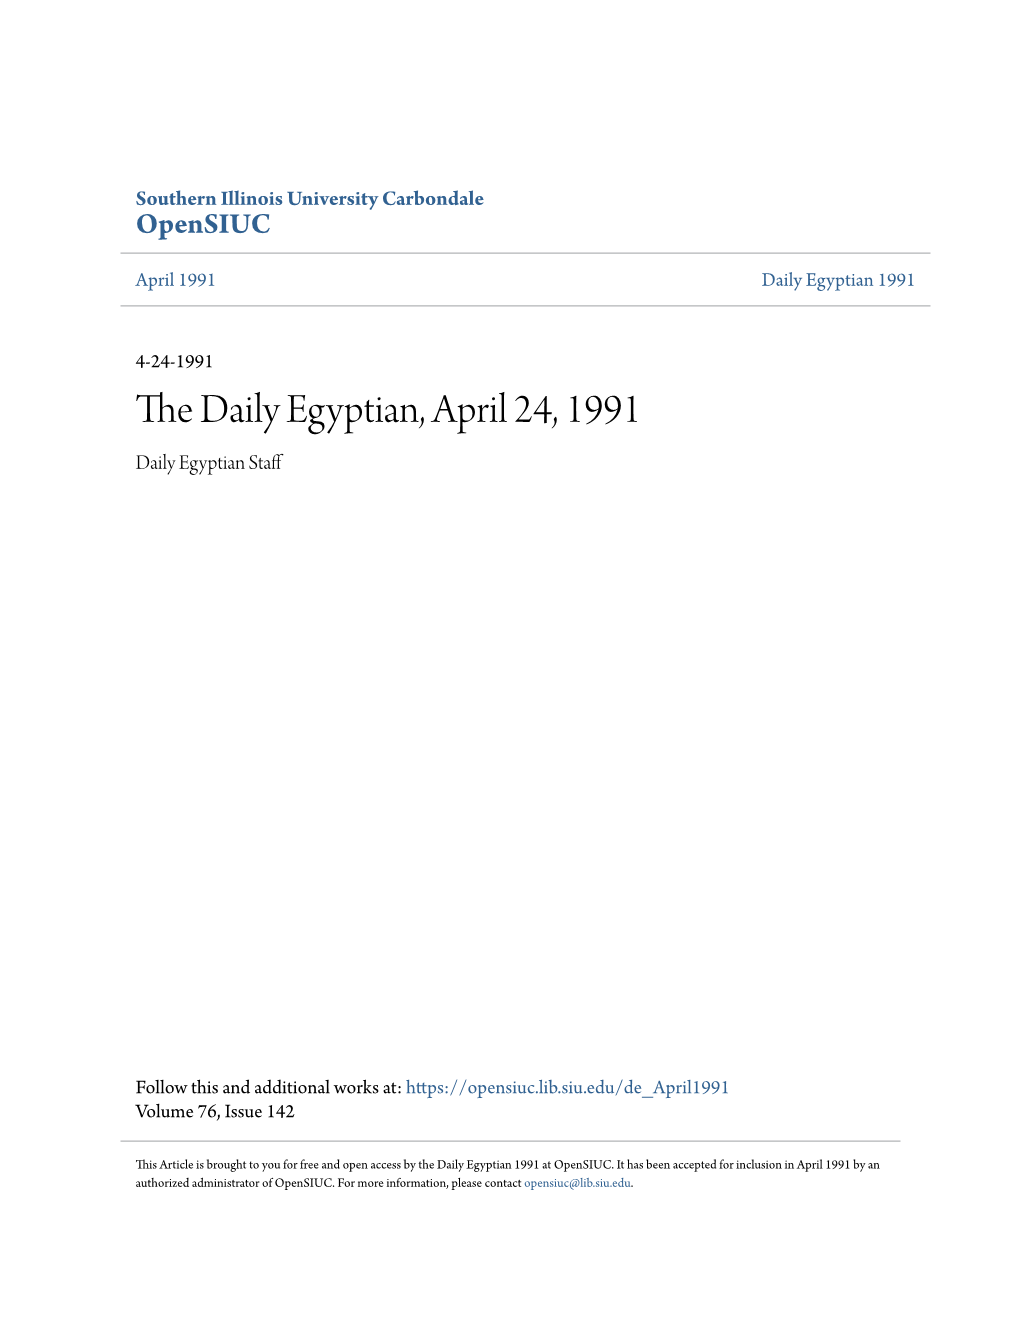 The Daily Egyptian, April 24, 1991